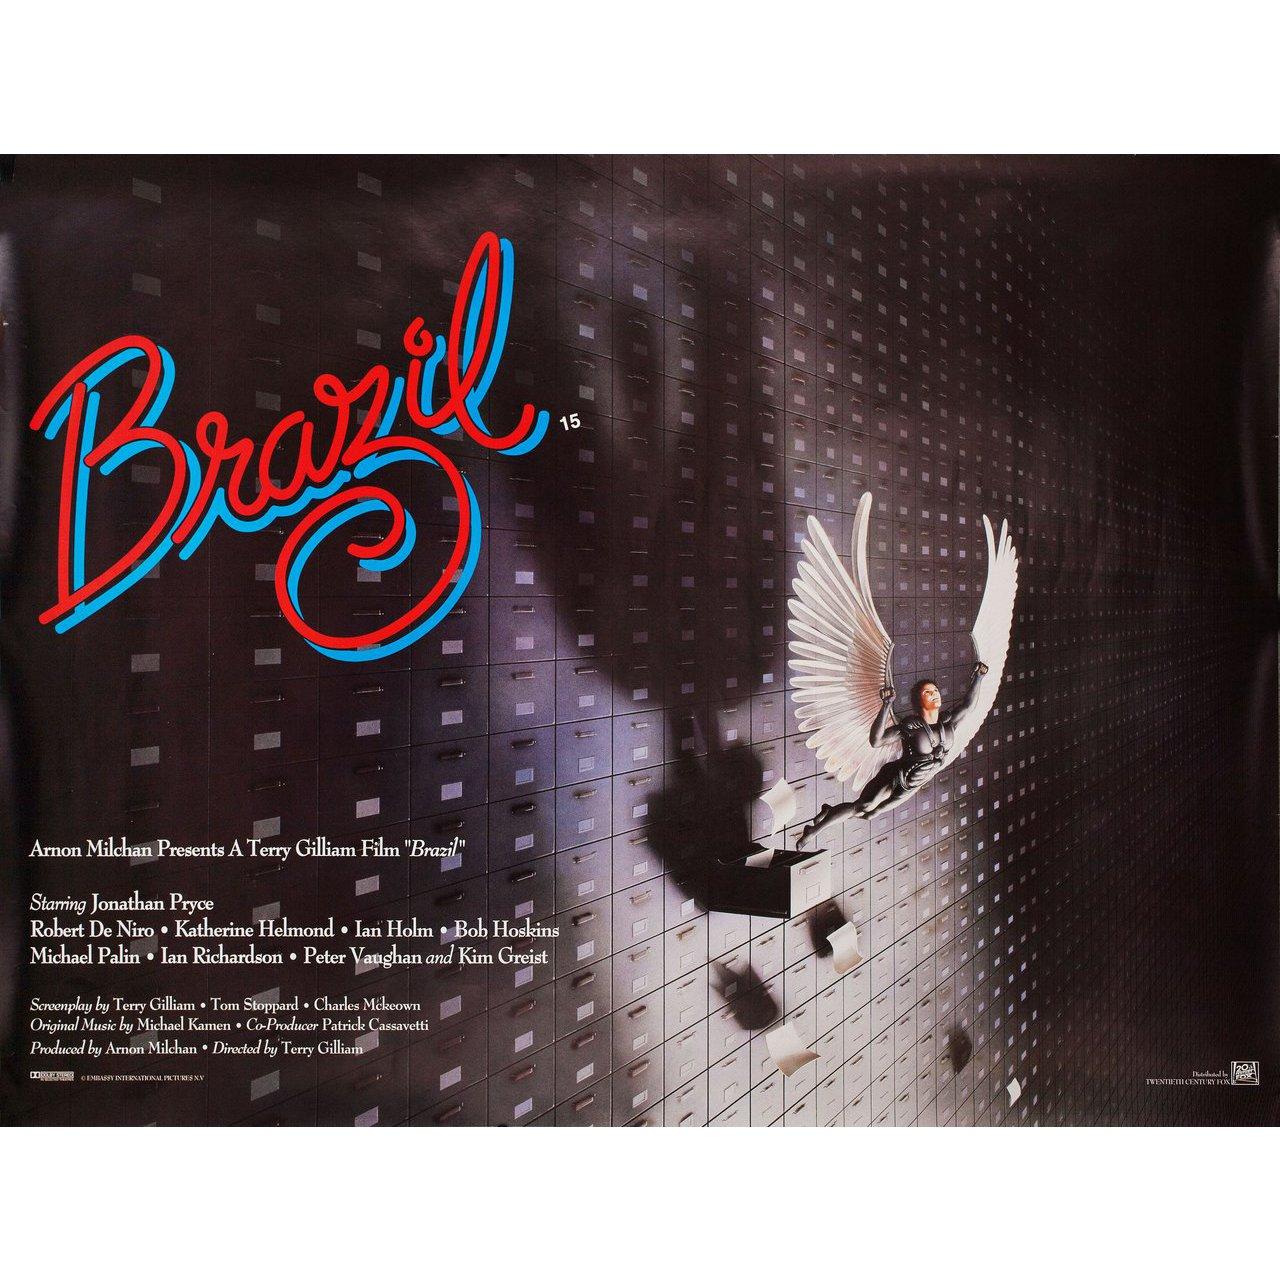 Original 1997 re-release British quad poster for the 1985 film Brazil directed by Terry Gilliam with Jonathan Pryce / Robert De Niro / Katherine Helmond / Ian Holm. Very good fine condition, rolled. Please note: the size is stated in inches and the